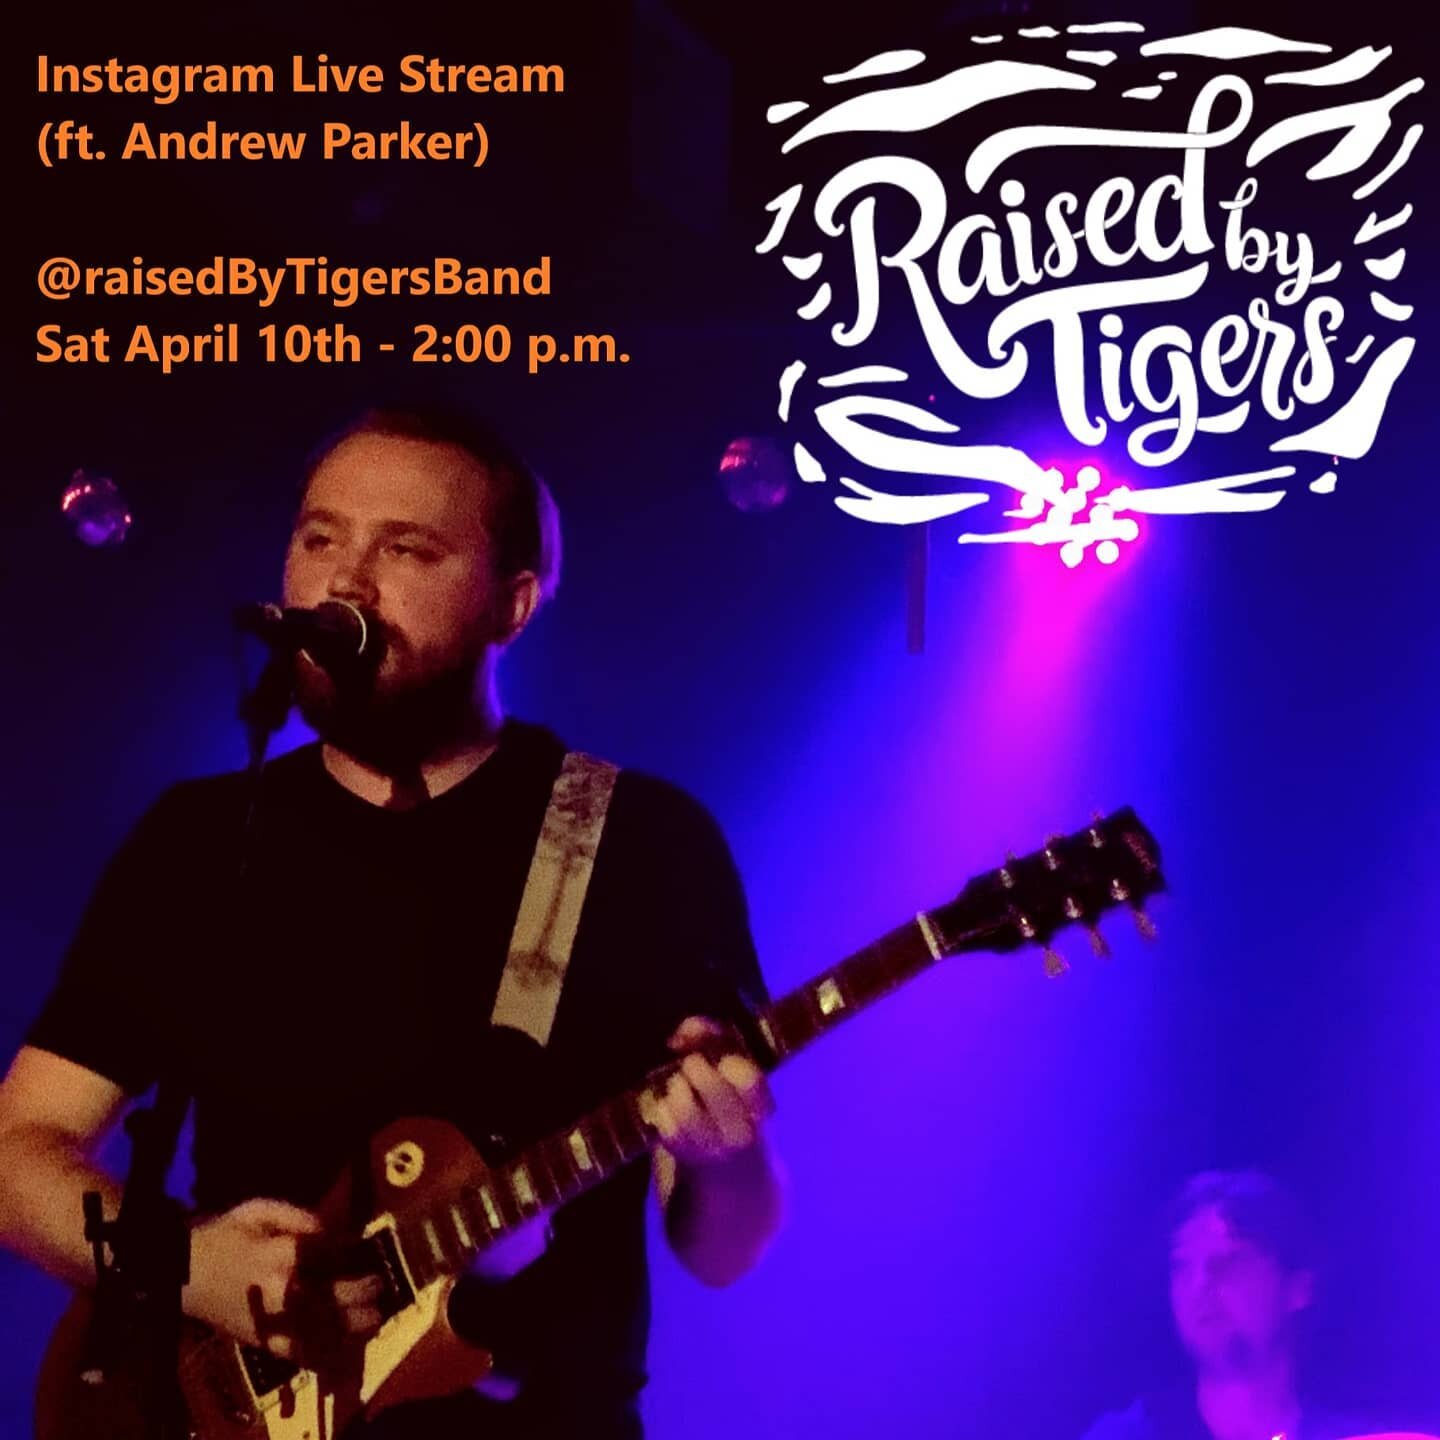 I miss playing music so I'll be doing a live stream a week from tomorrow to share the songs I've been playing.

Going live from my living room, April 10th, 2:00 p.m.

I'll play till I'm tired or run out of songs to play 🤘🐯

#raisedbytigers #livestr